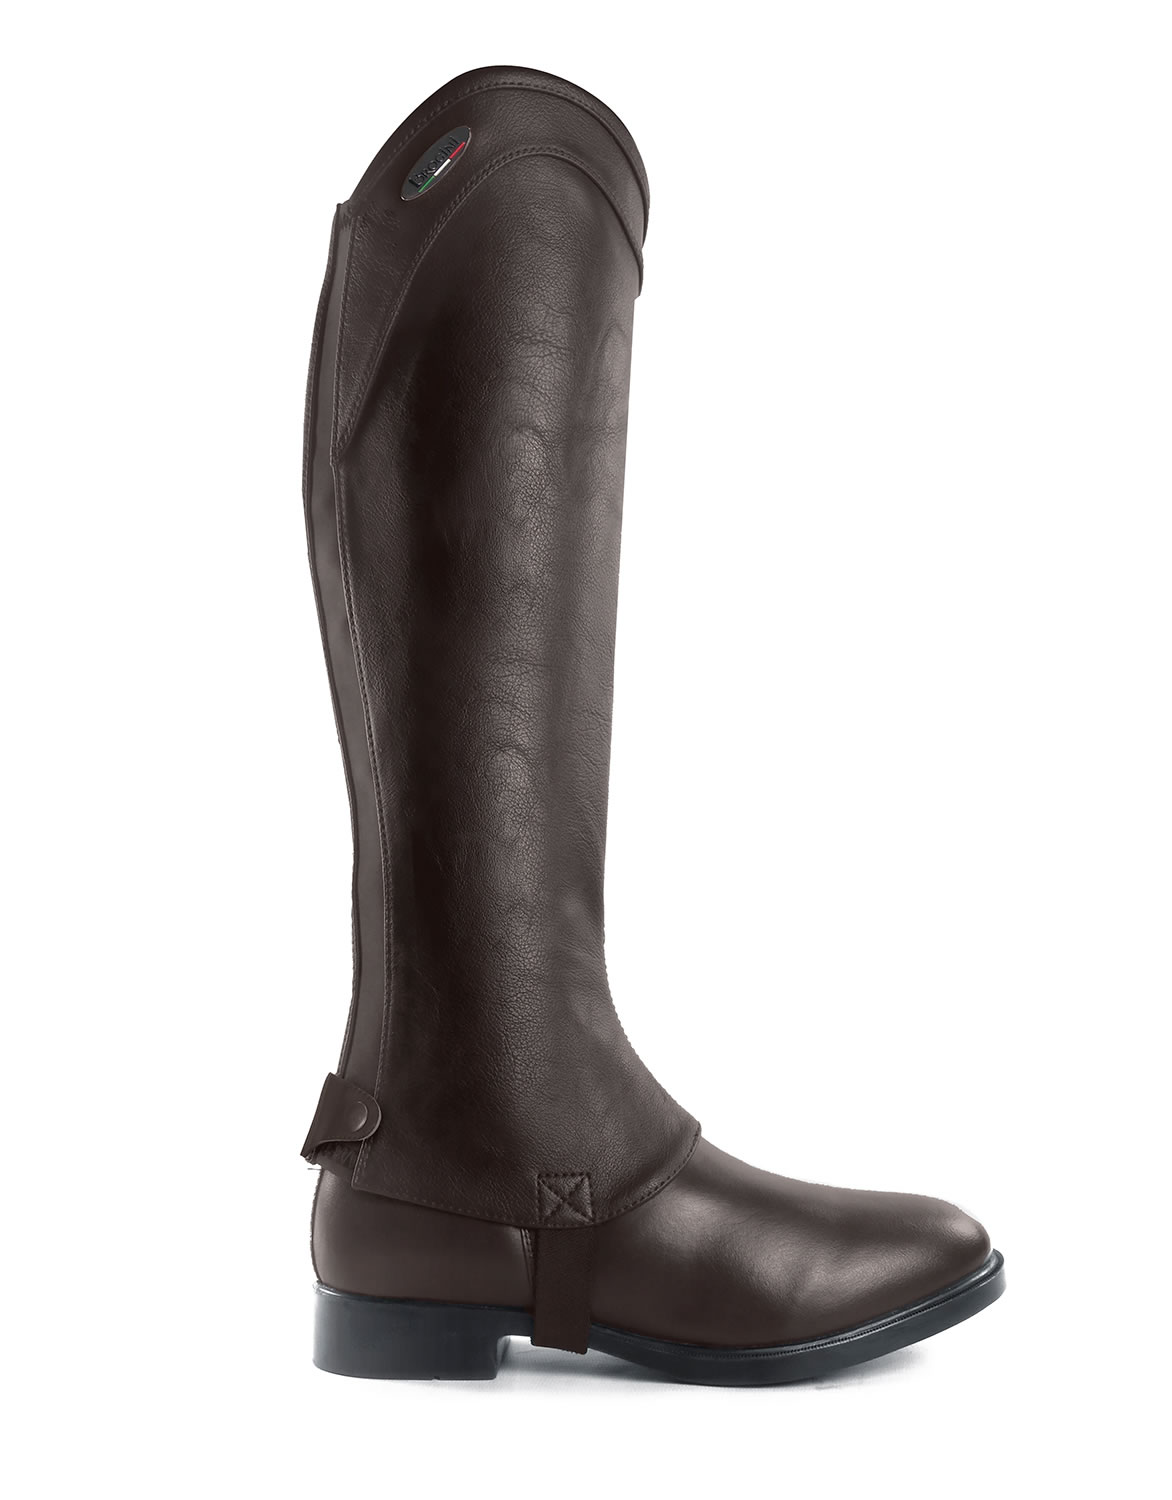 BROGINI MARCONIA EASY-CARE GAITERS TALL BROWN LARGE LARGE TALL